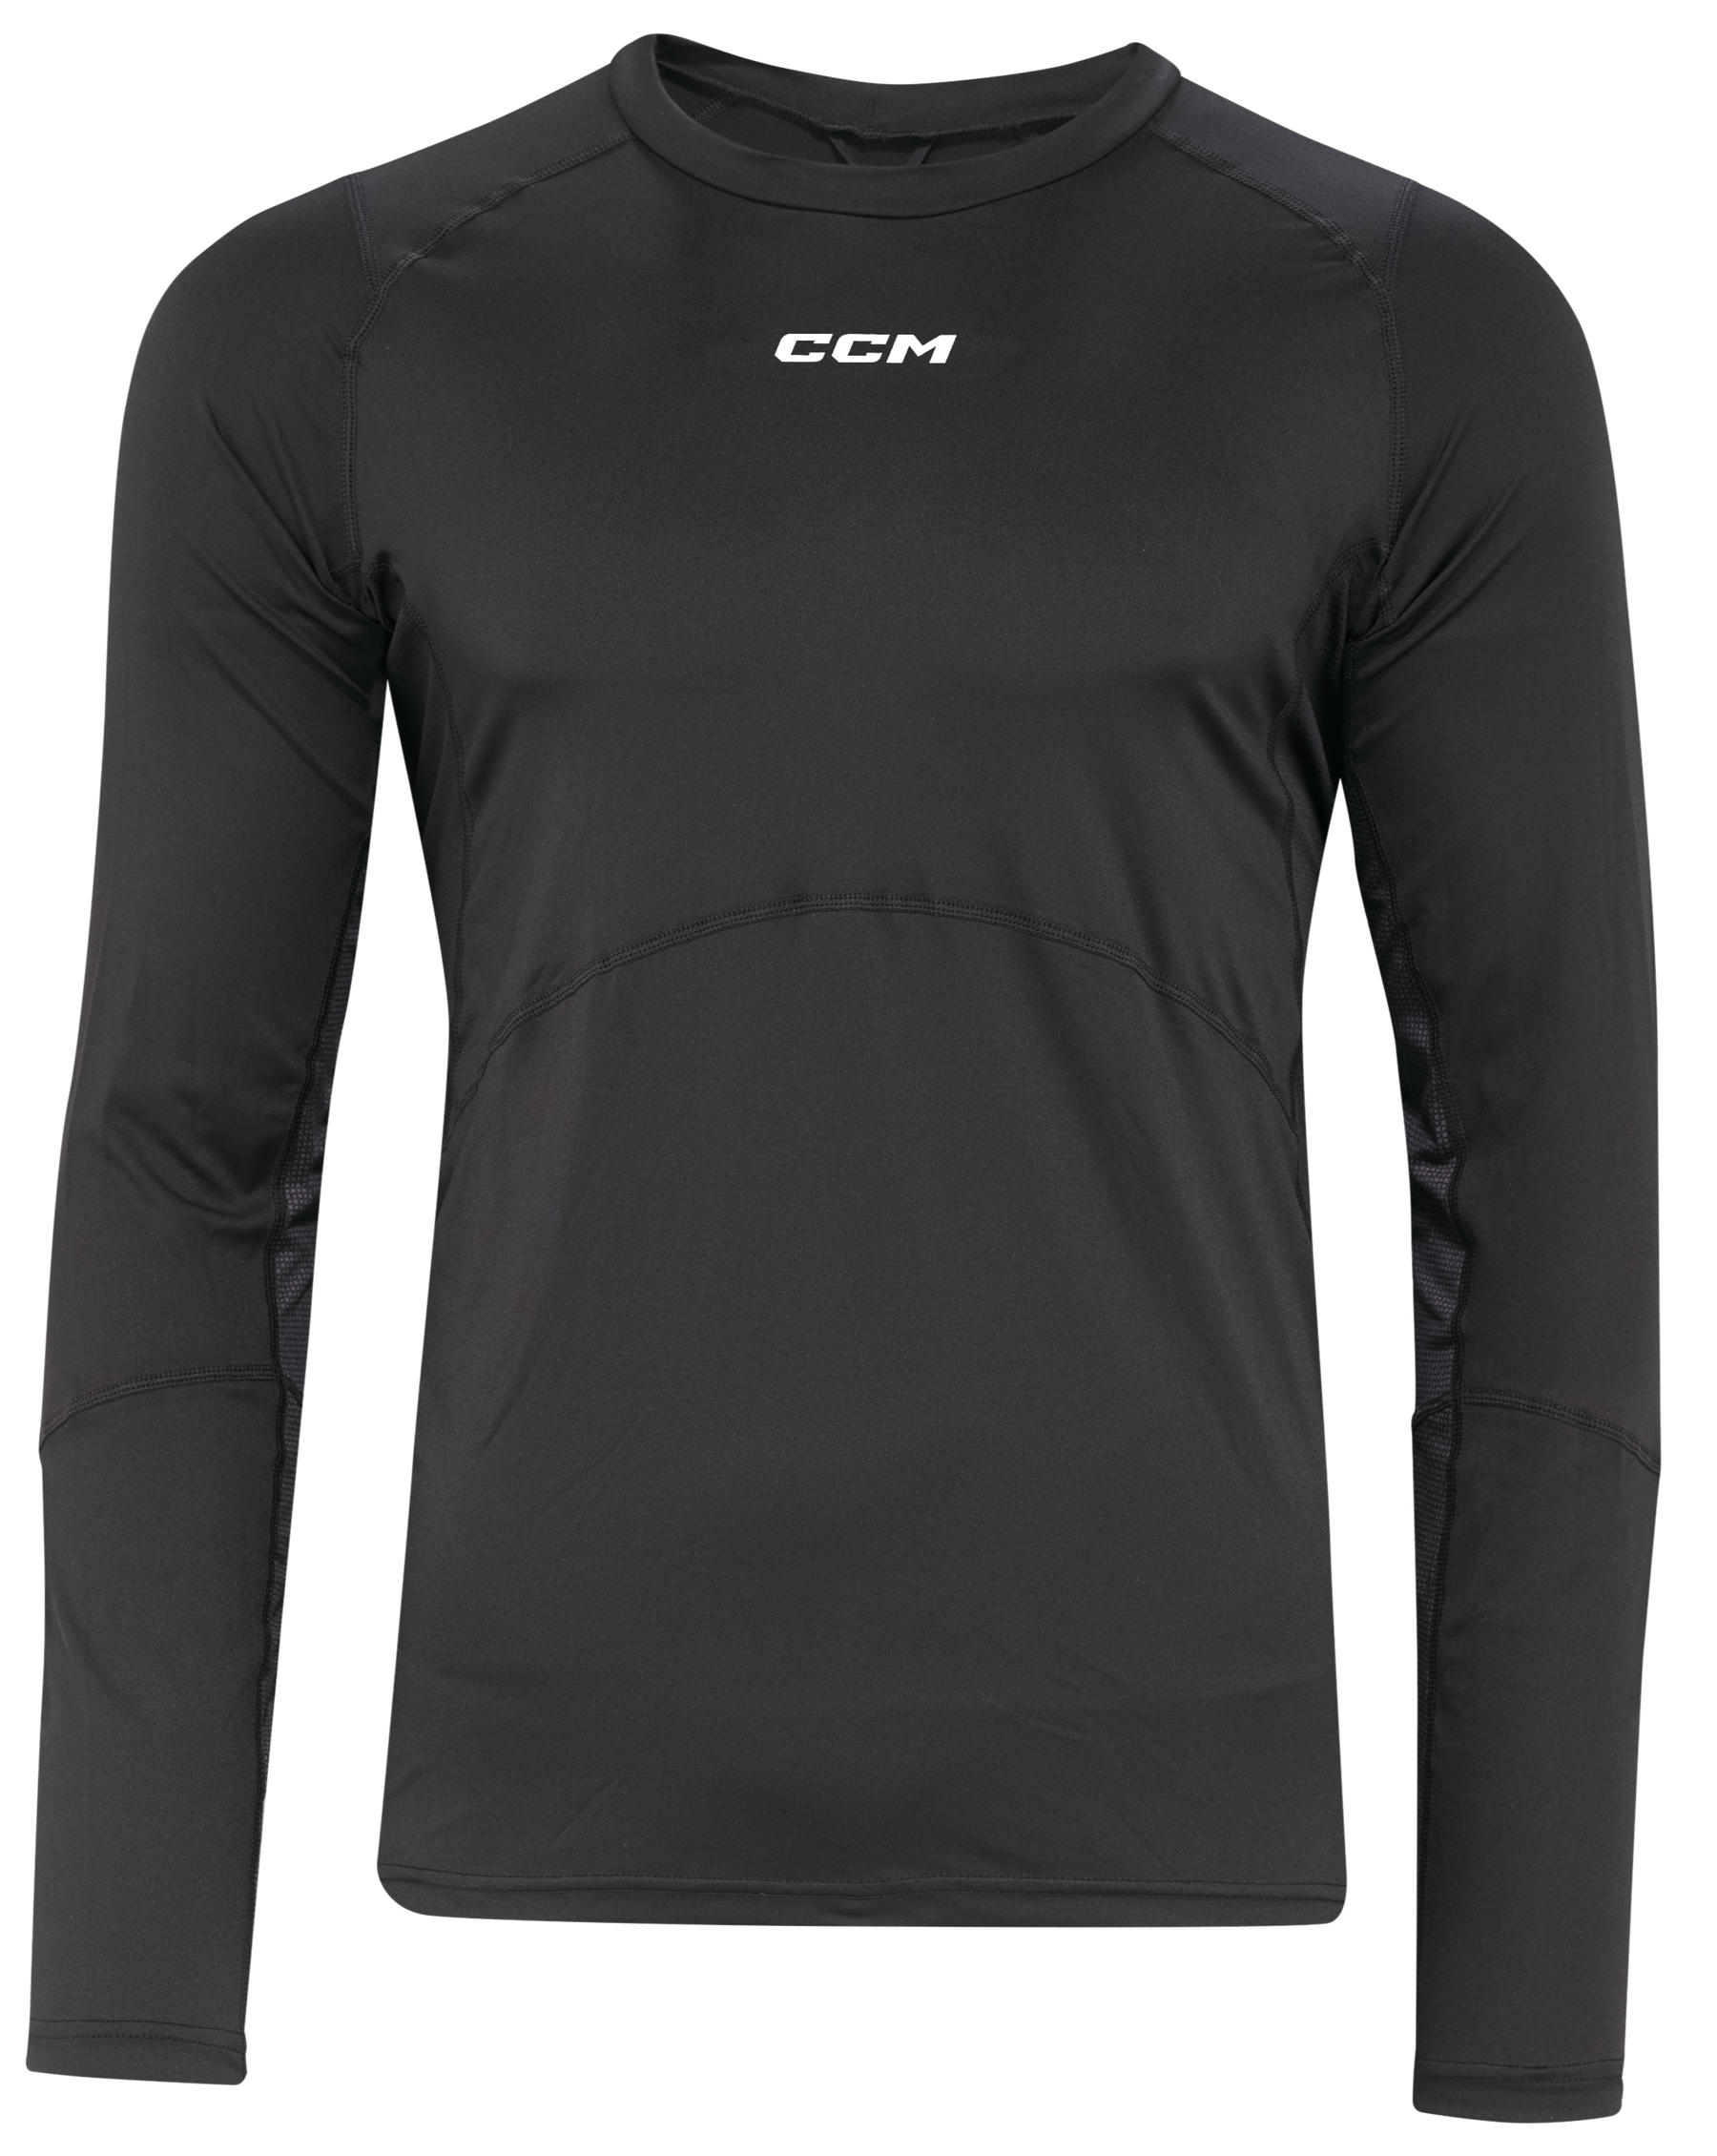 CCM Compression Long Sleeve with Gel Top Adult